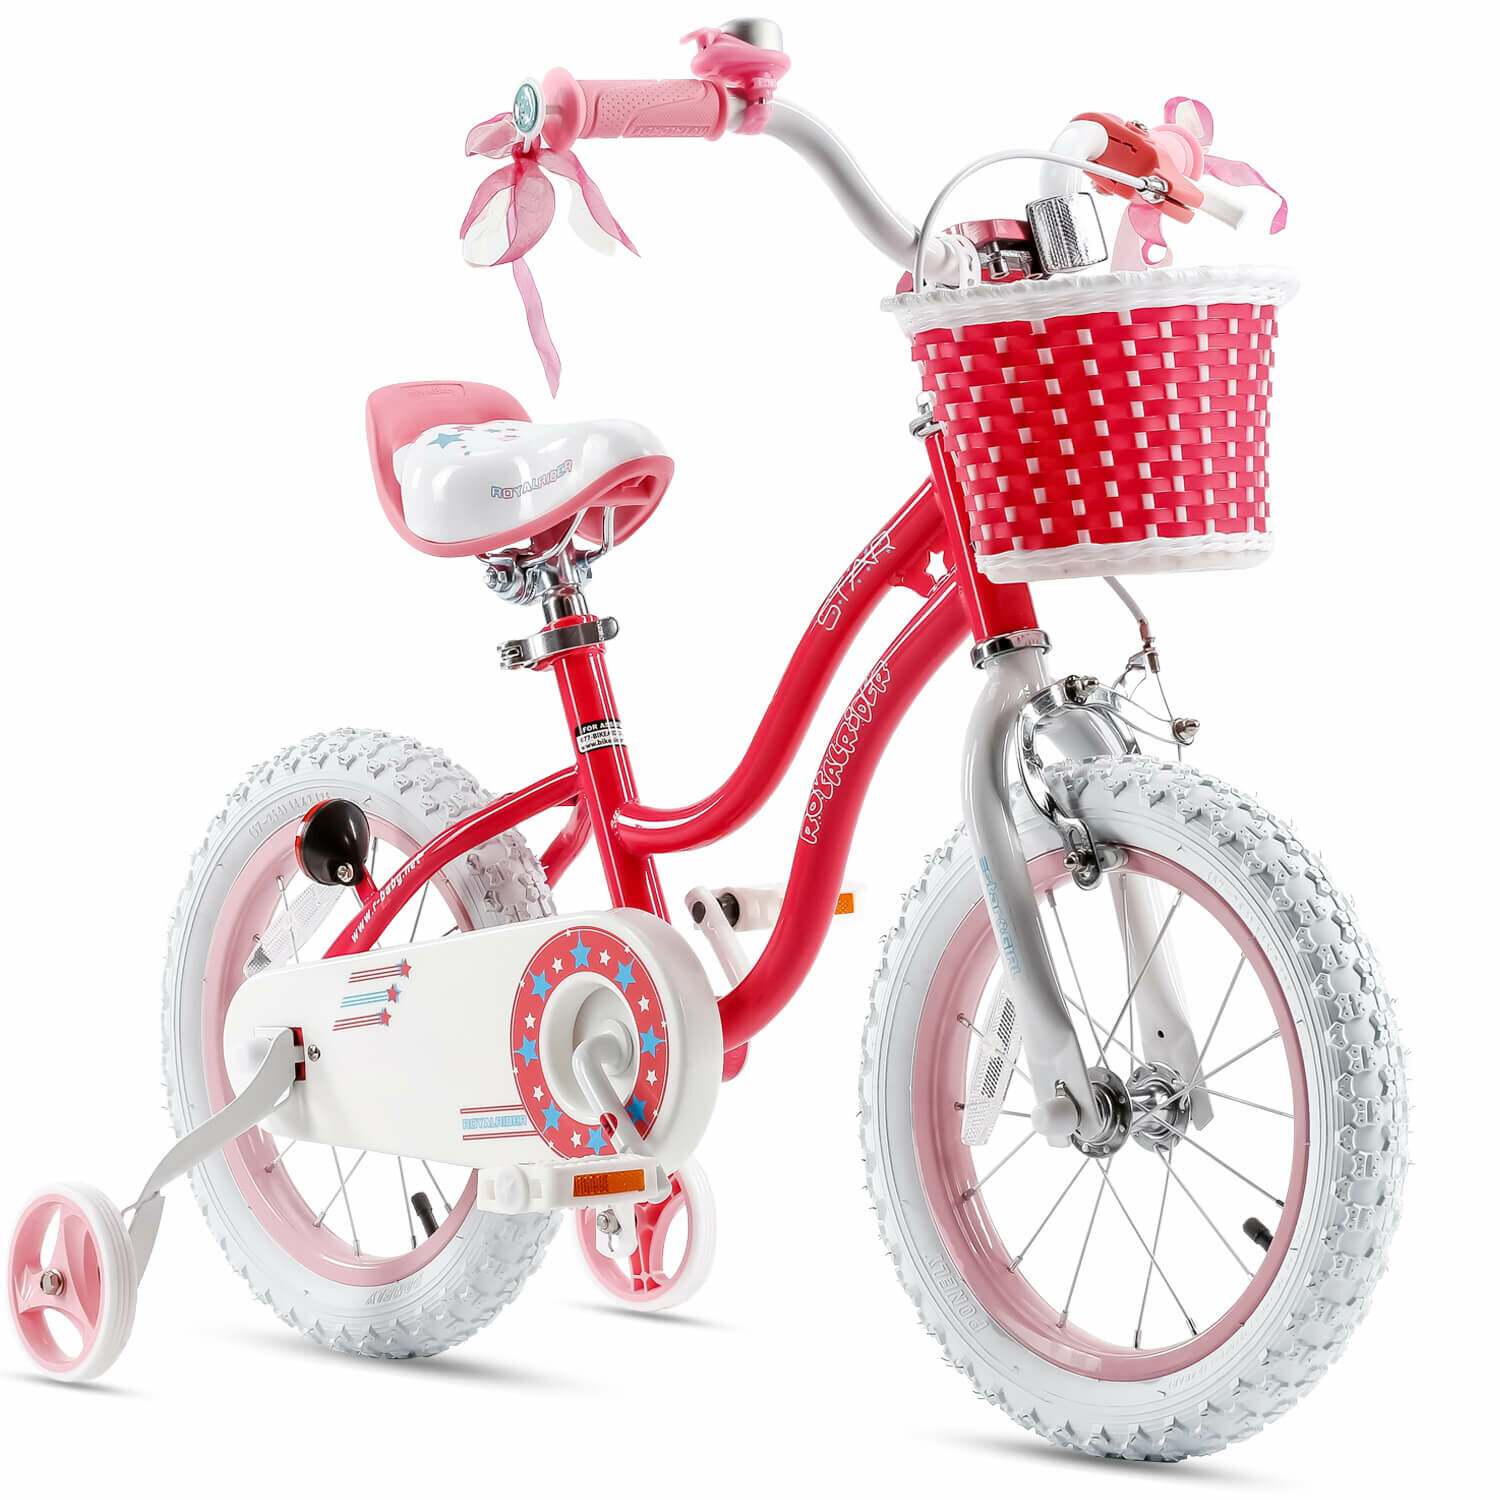 [EU Direct] ROYALBABY STARGIRL 14 Inch Children's Bike Two Brake System Kids Bicycle With Training Wheel For 3~5 Years o